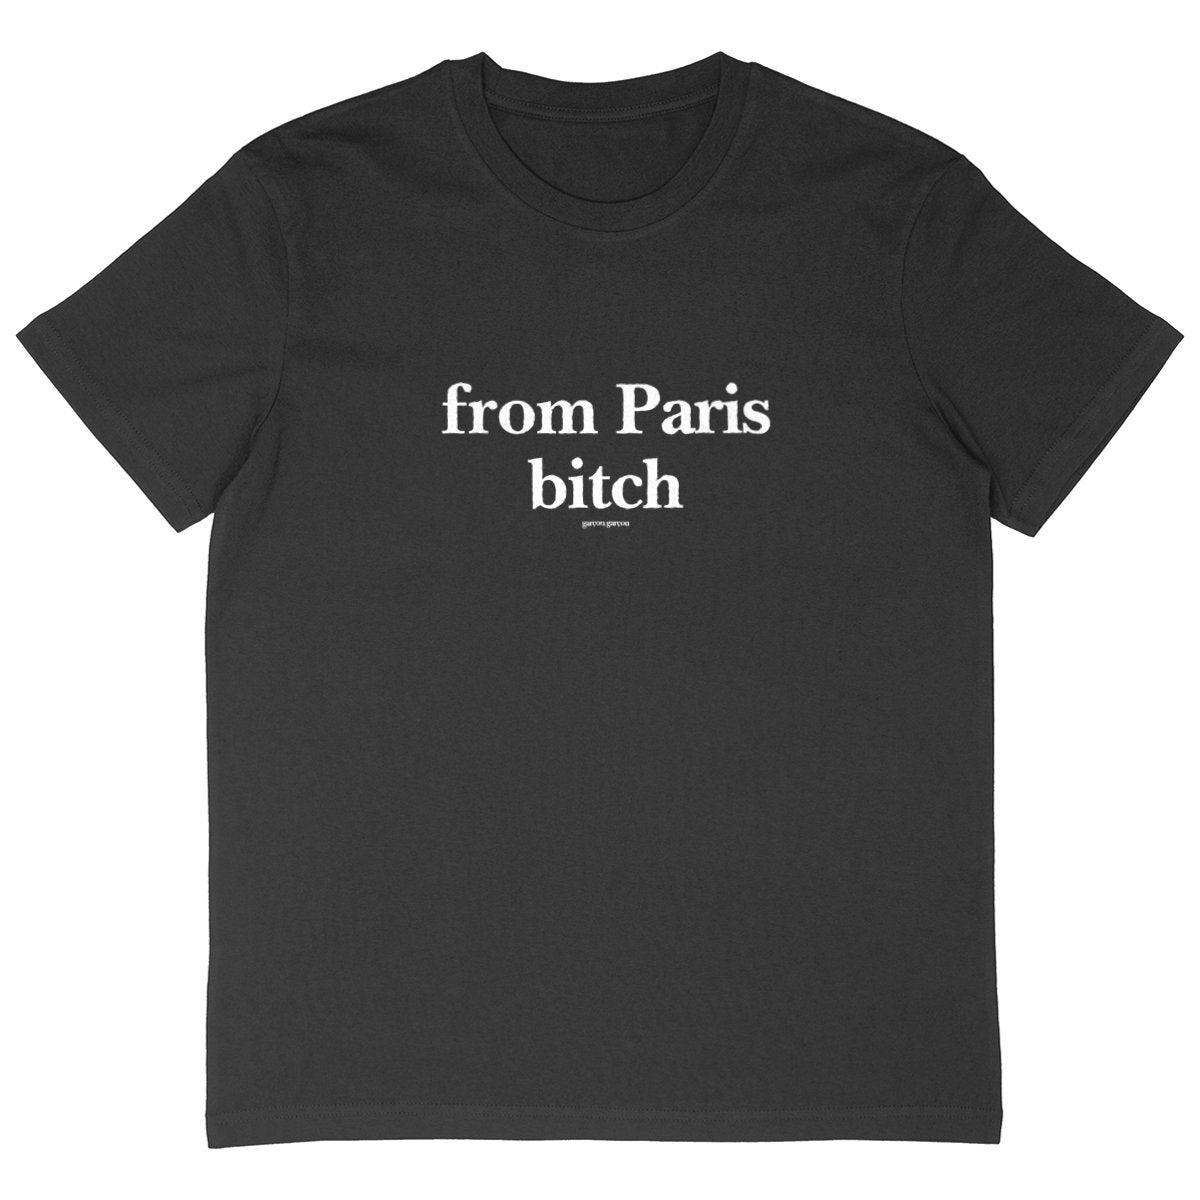 from paris bitch tee oversized. garçon garçon tee oversize BLACK. Dive into the essence of Parisian cool with this oversized tee. The subtle 'garçon garçon' signature whispers a chic narrative, offering a slice of the city's famed elegance. Perfect for those who speak style with simplicity.